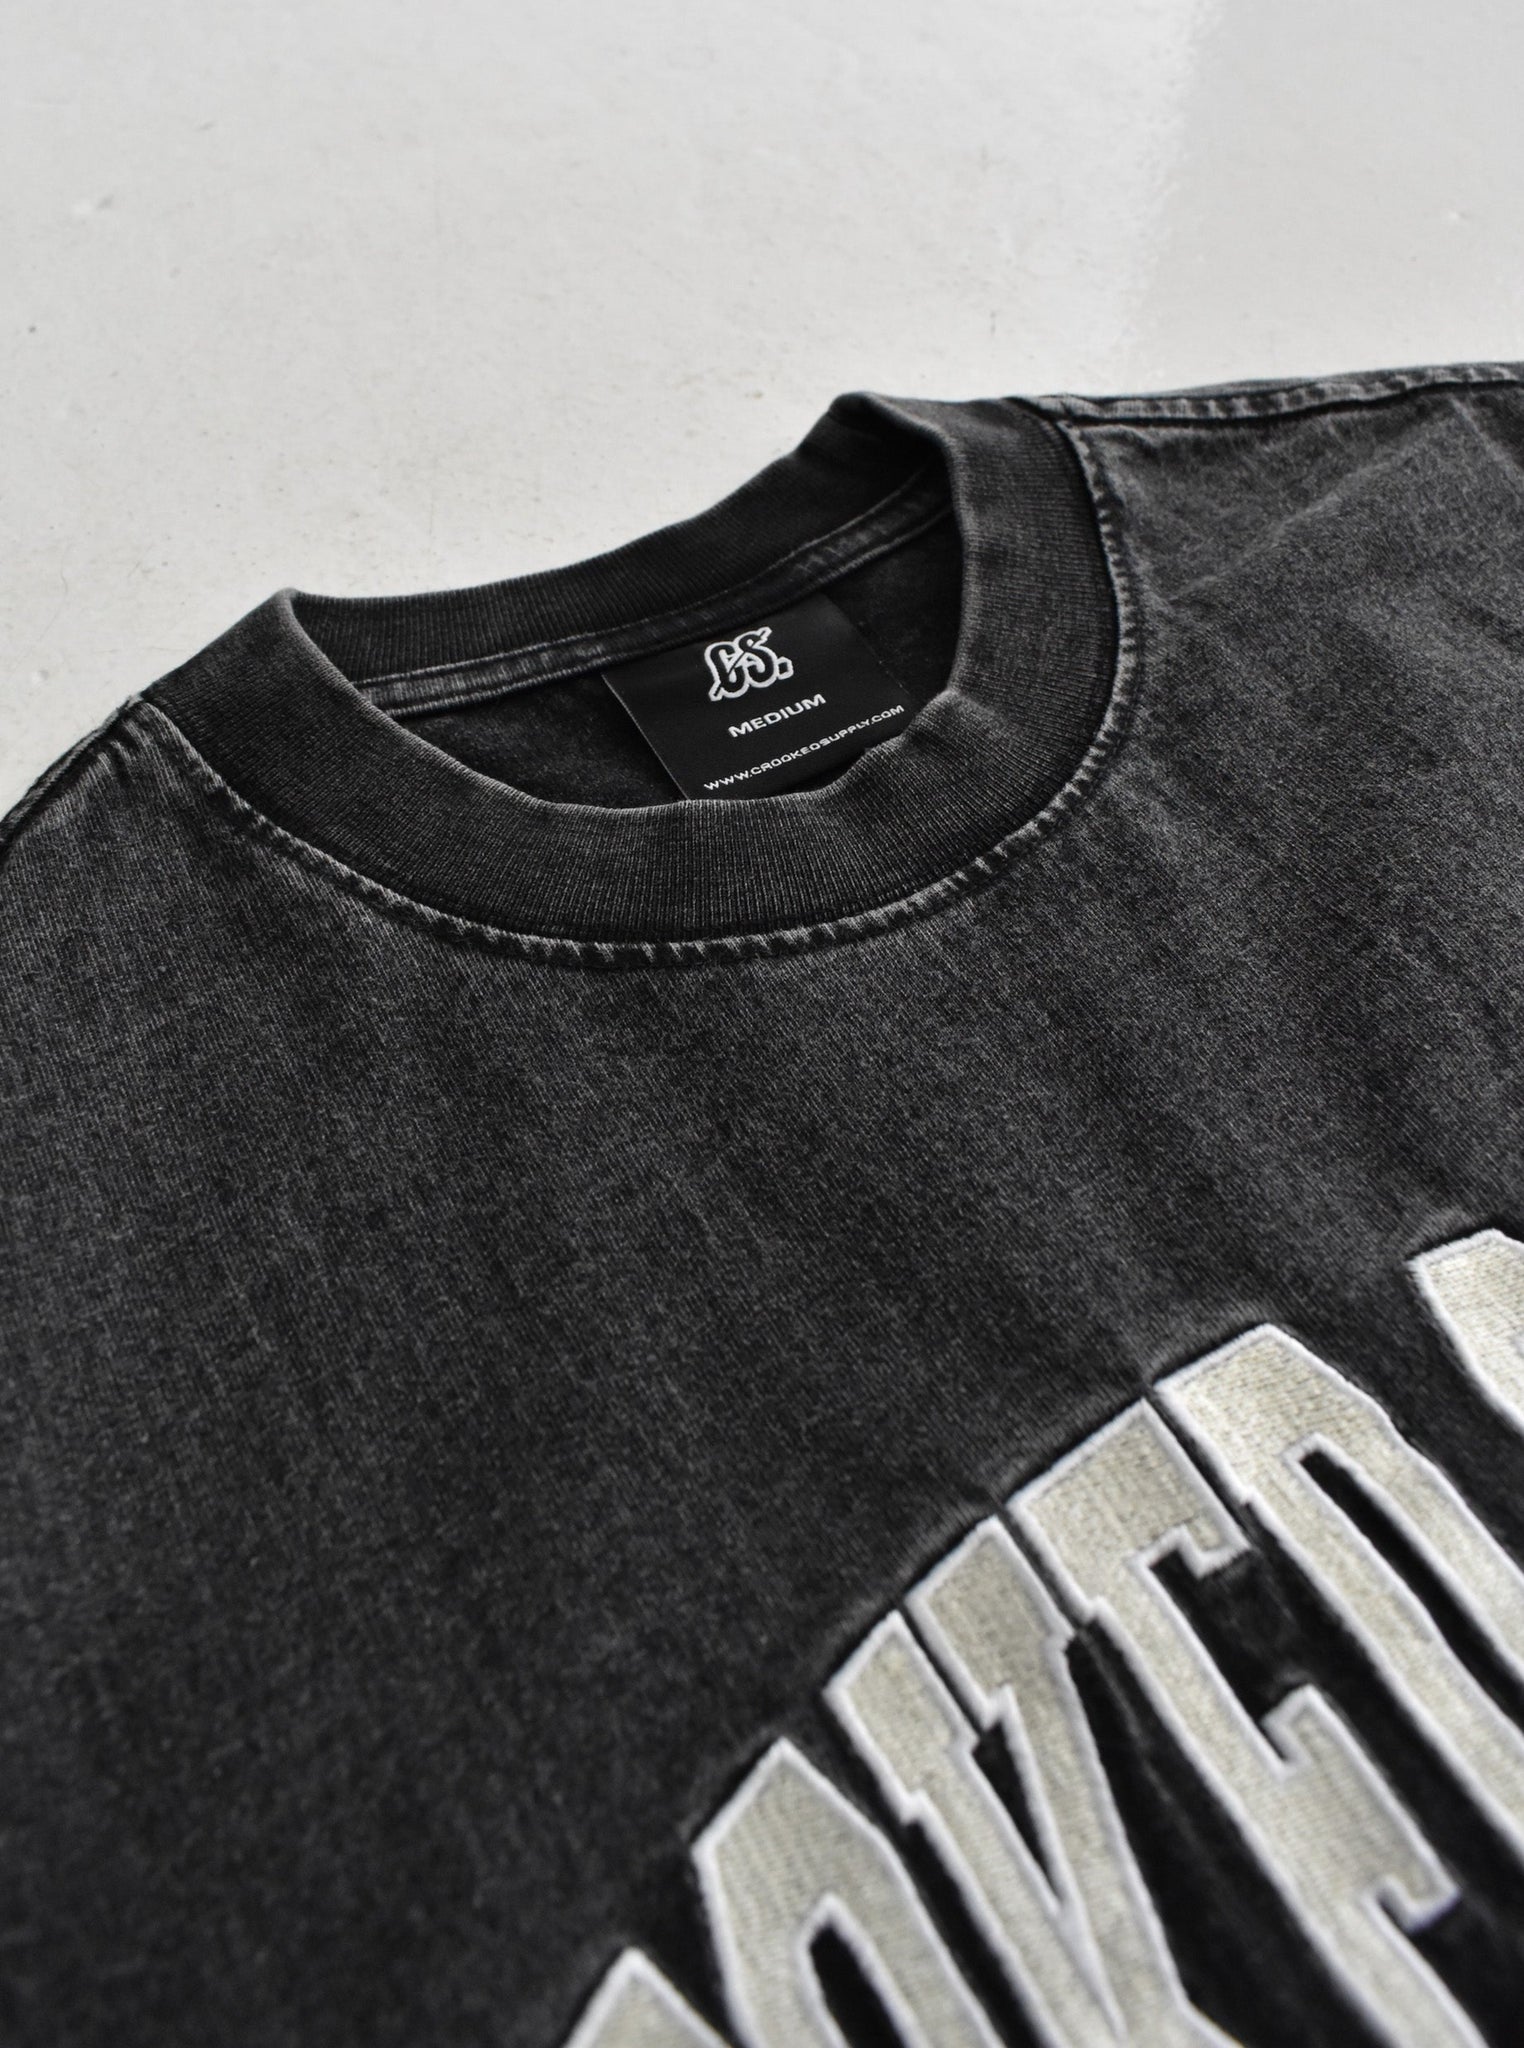 Jersey Tee - Vintage Washed (Embroidered Logo)